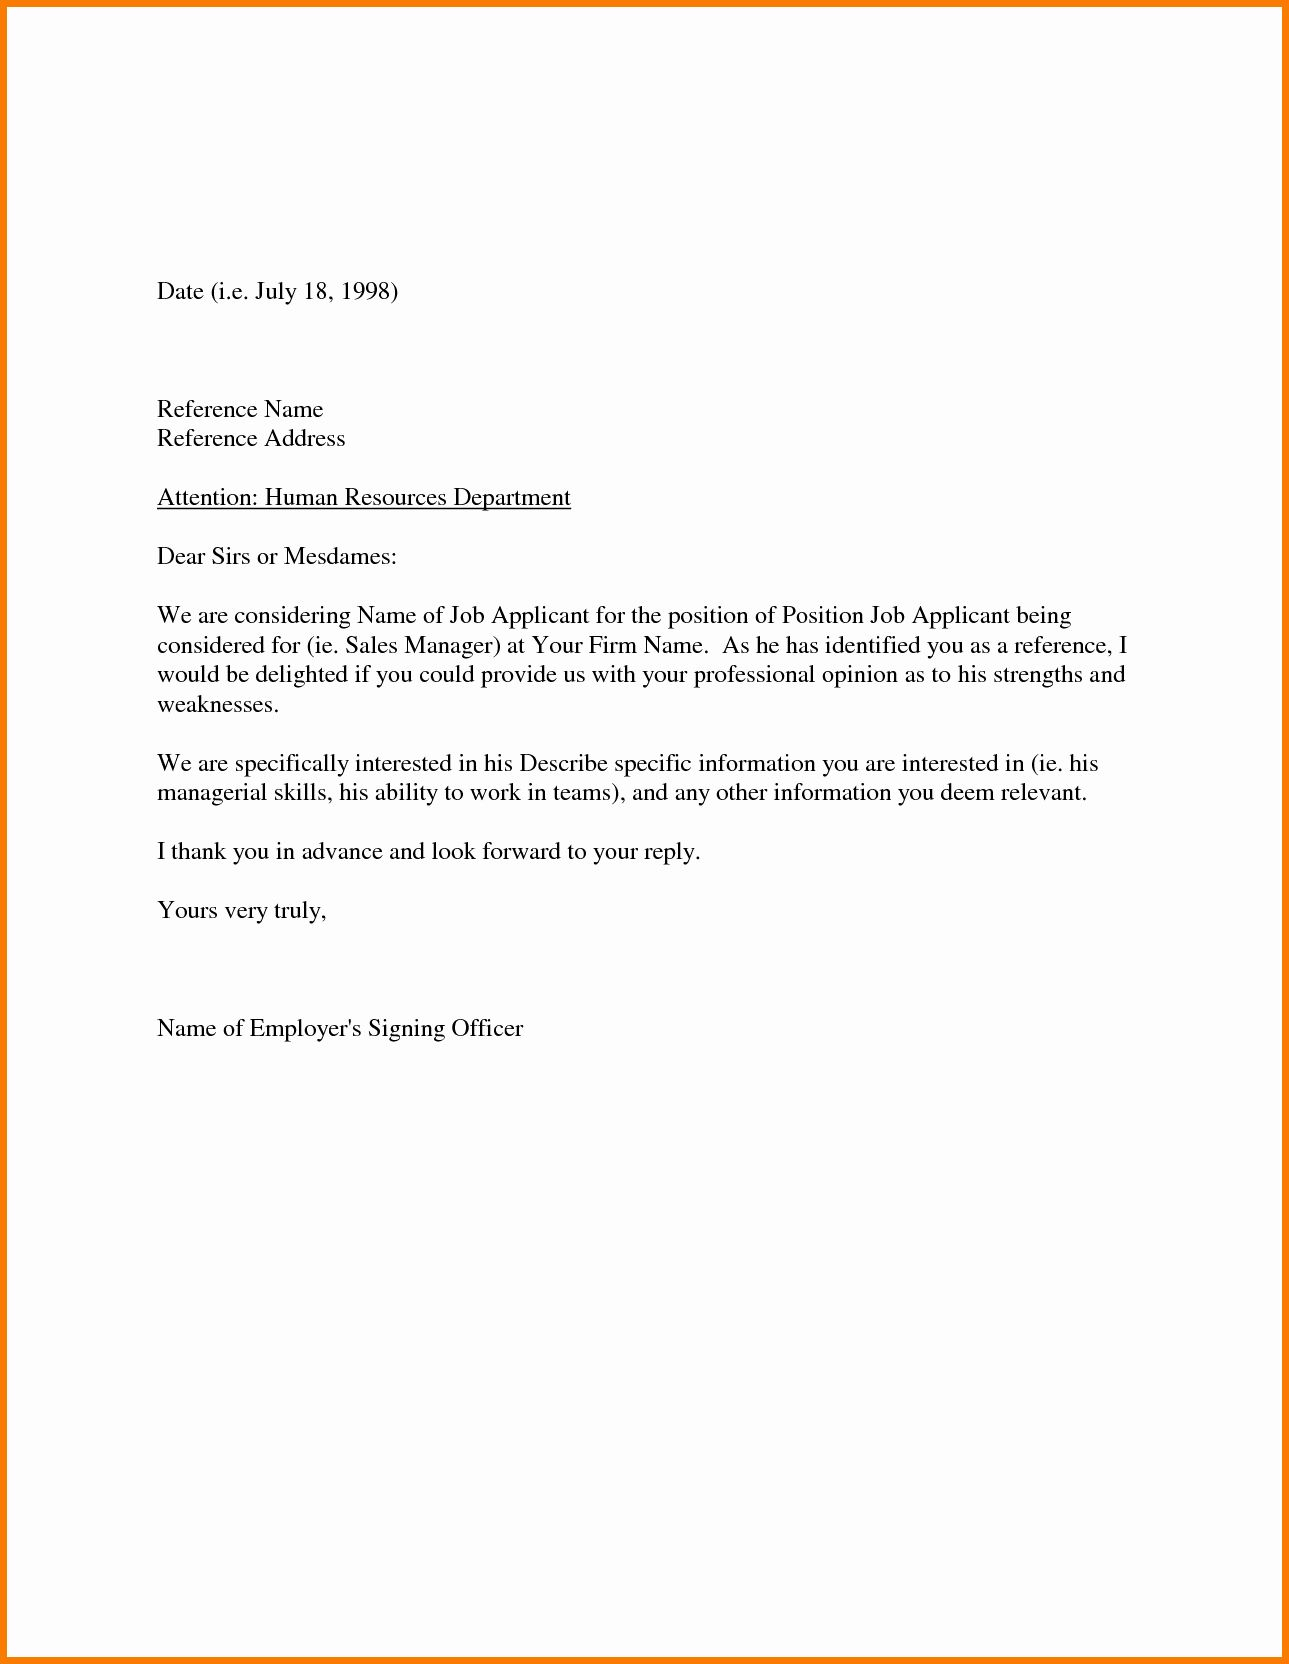 40 Letters Of Recommendation Template Employee intended for dimensions 1289 X 1664